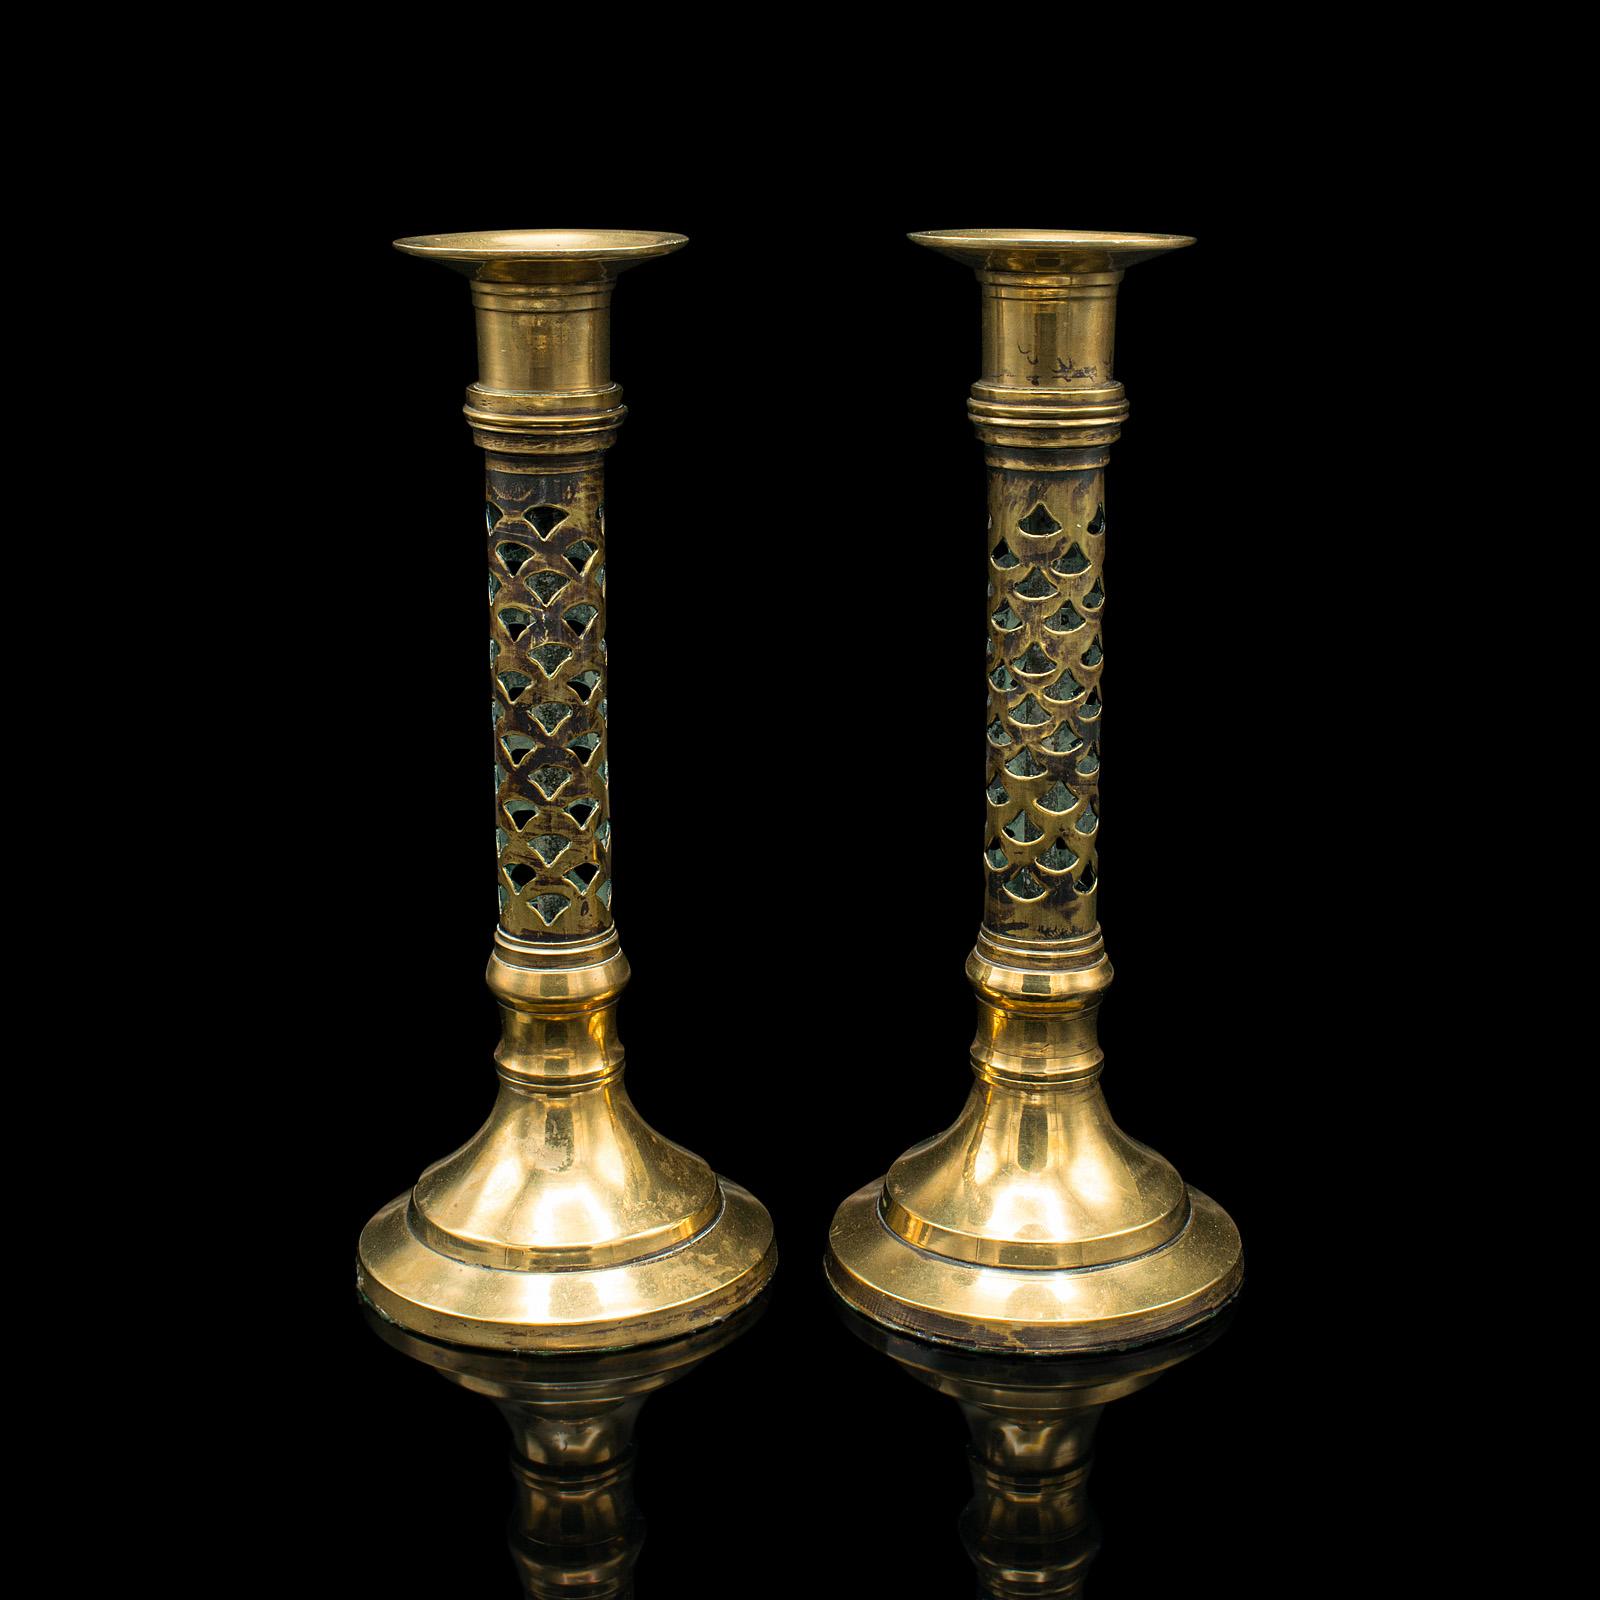 This is a pair of antique ecclesiastical candlesticks. An English, pierced brass candle holder in Aesthetic Period taste, dating to the Victorian period, circa 1890.

Distinguished candlesticks with an elegant appearance
Displaying a desirable aged